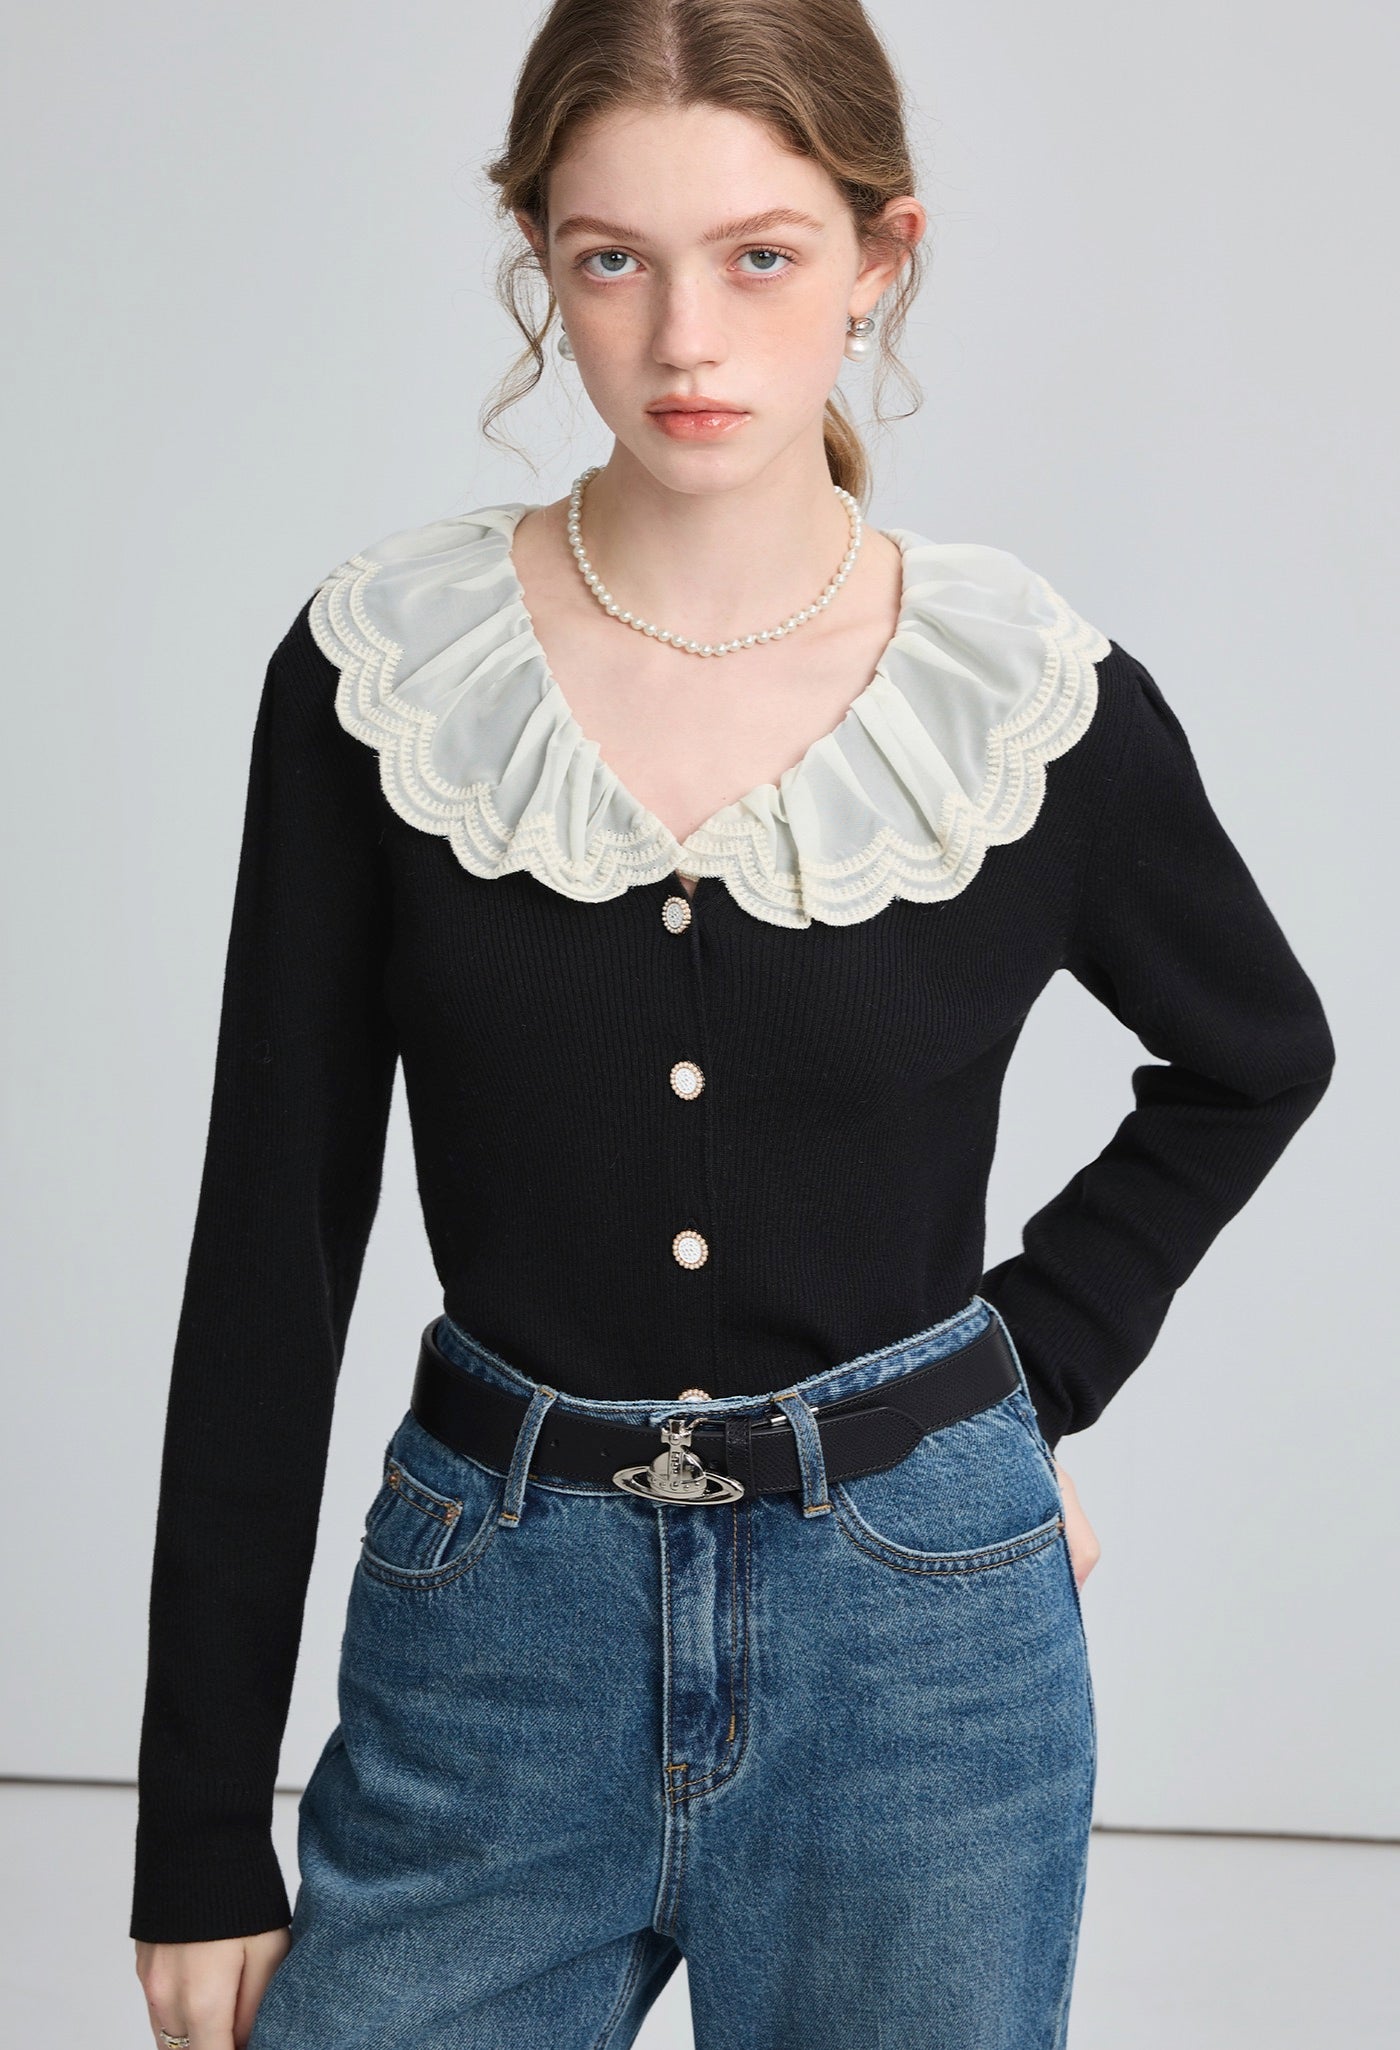 petal,collar,knit,sweater,black,white,cool,cute,simple,sexy,mode